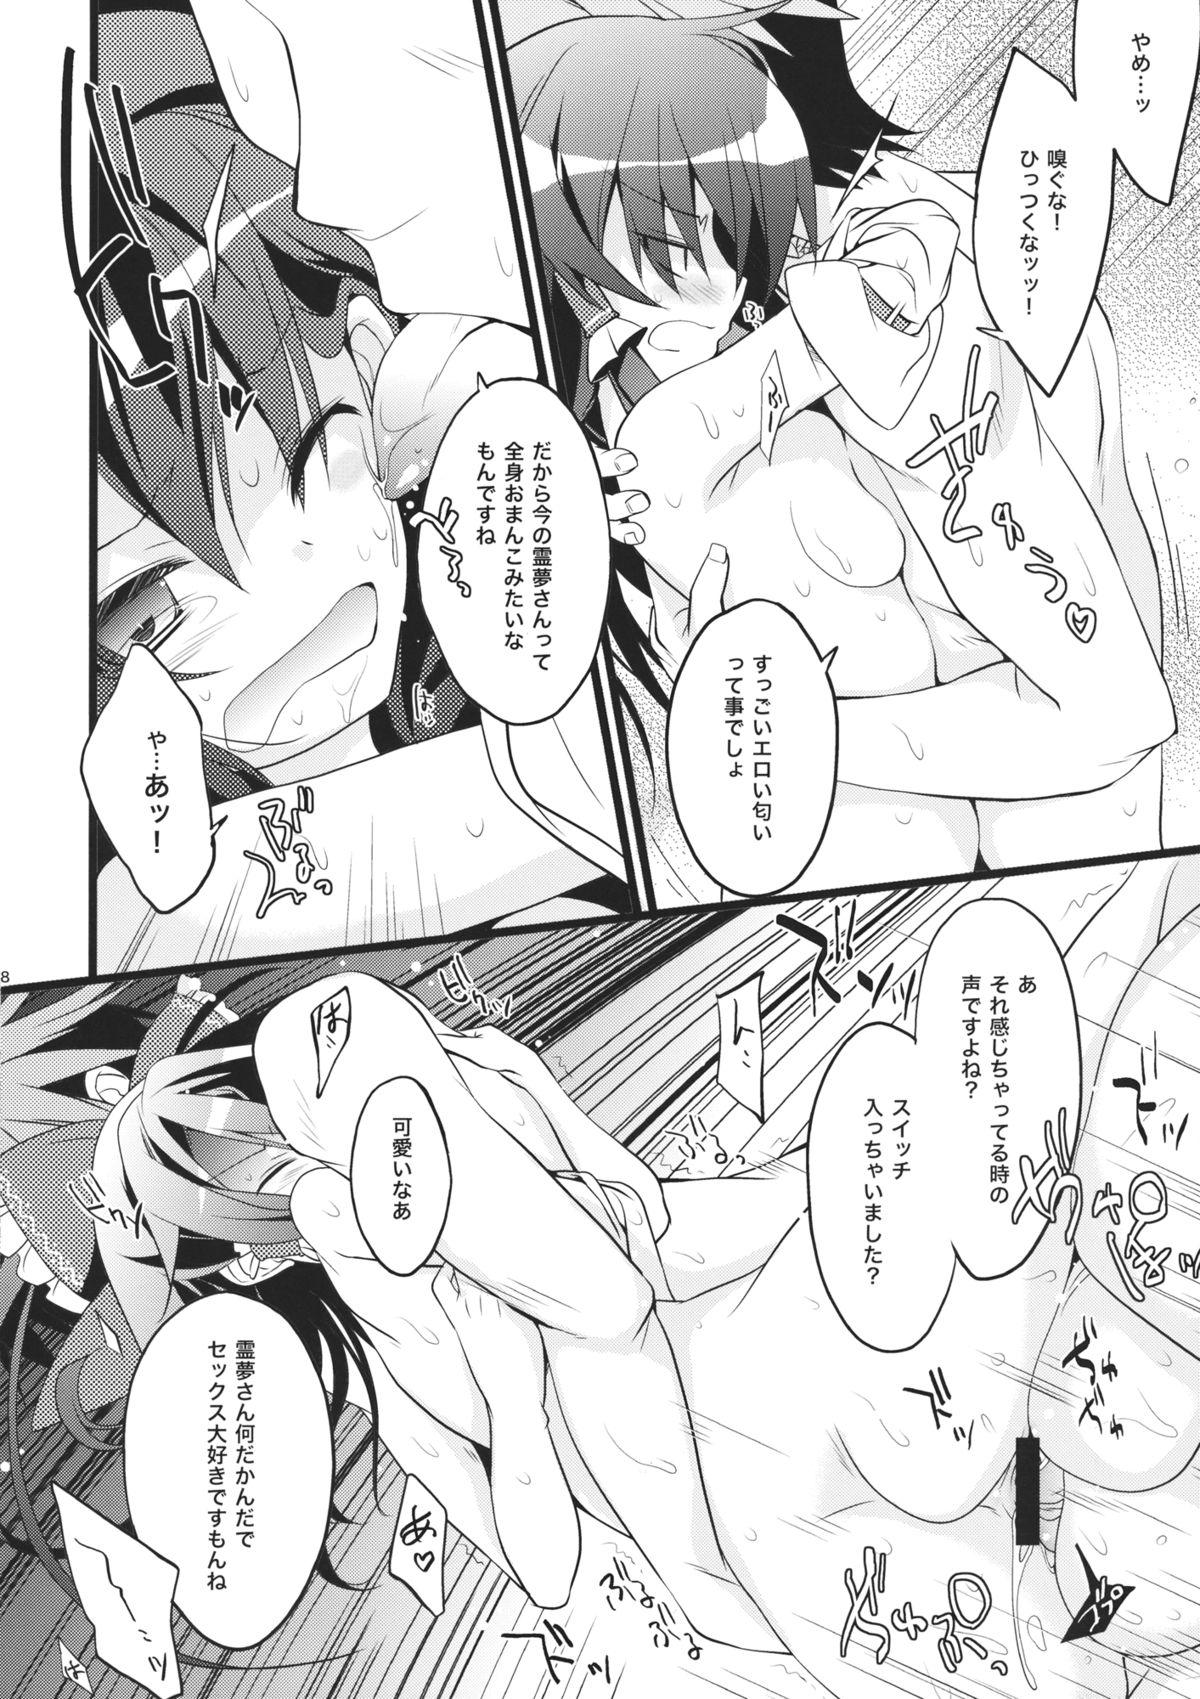 Hot Mom SUMMER SUMMER summer summer Go Go SUMMER-sex - Touhou project Small - Page 7